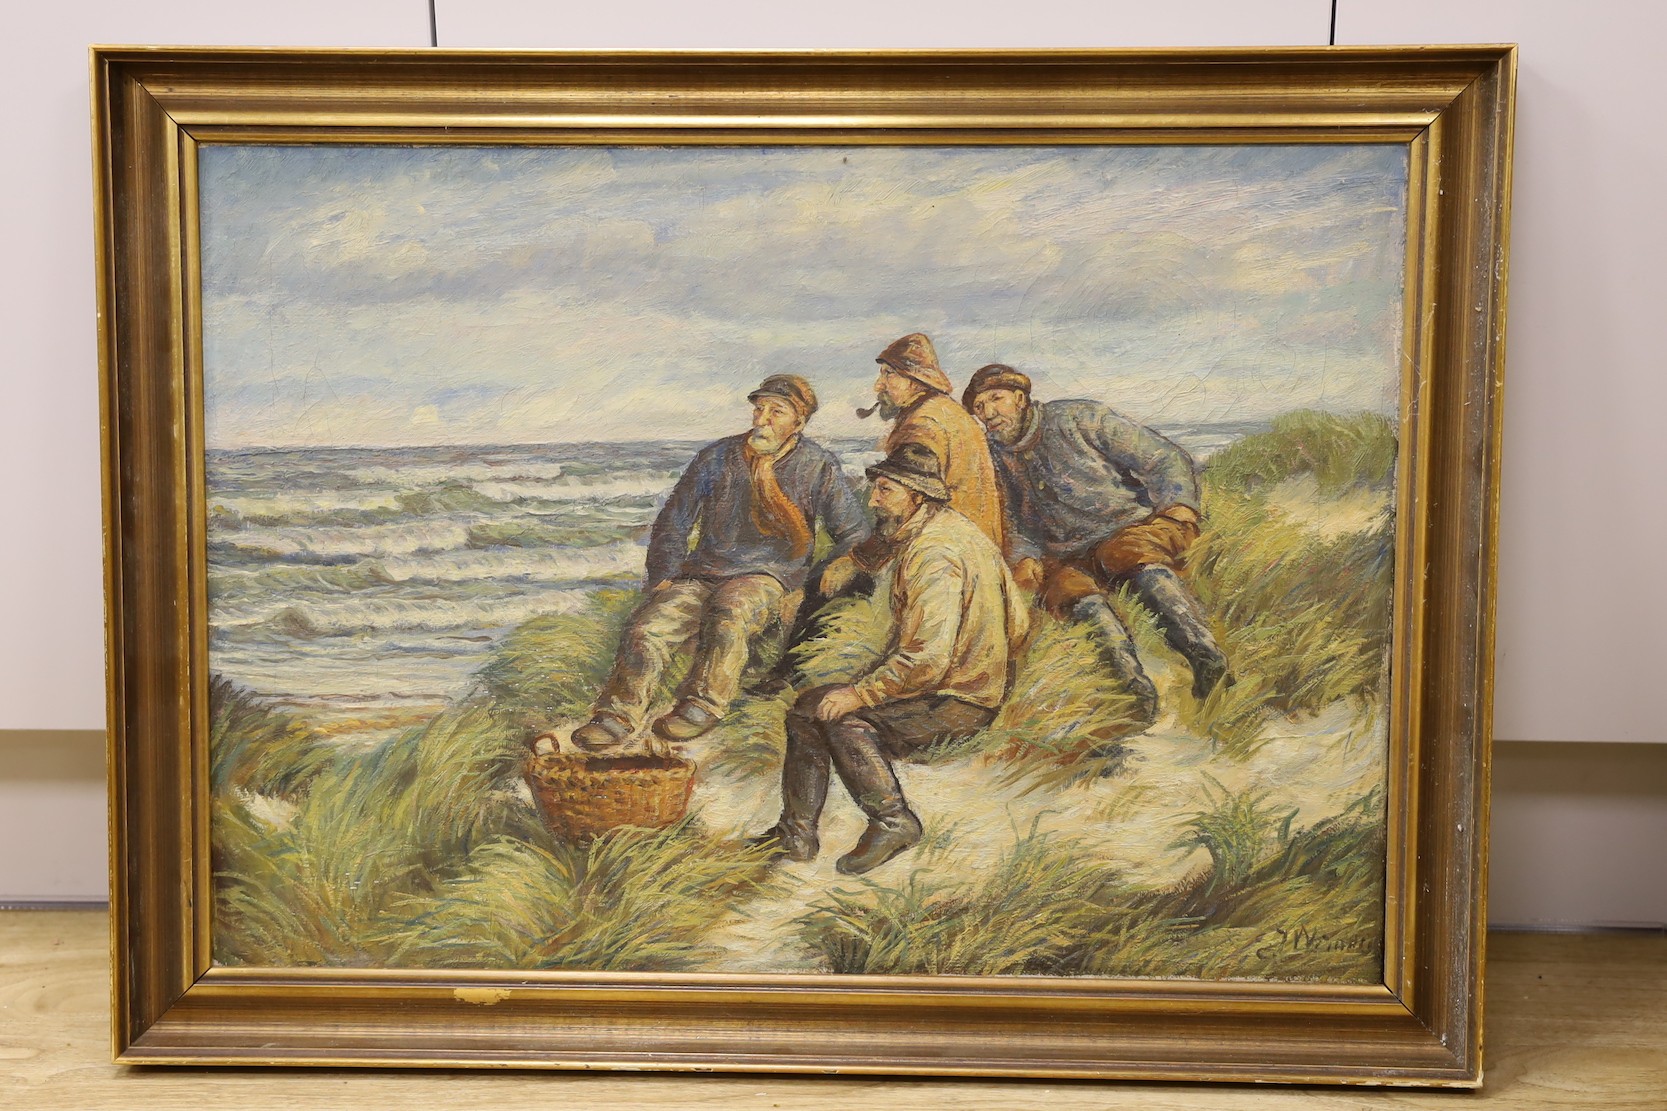 English School, 20th century, oil on canvas, Four fisherfolk sat along the shore, indistinctly signed, 47 x 67cm